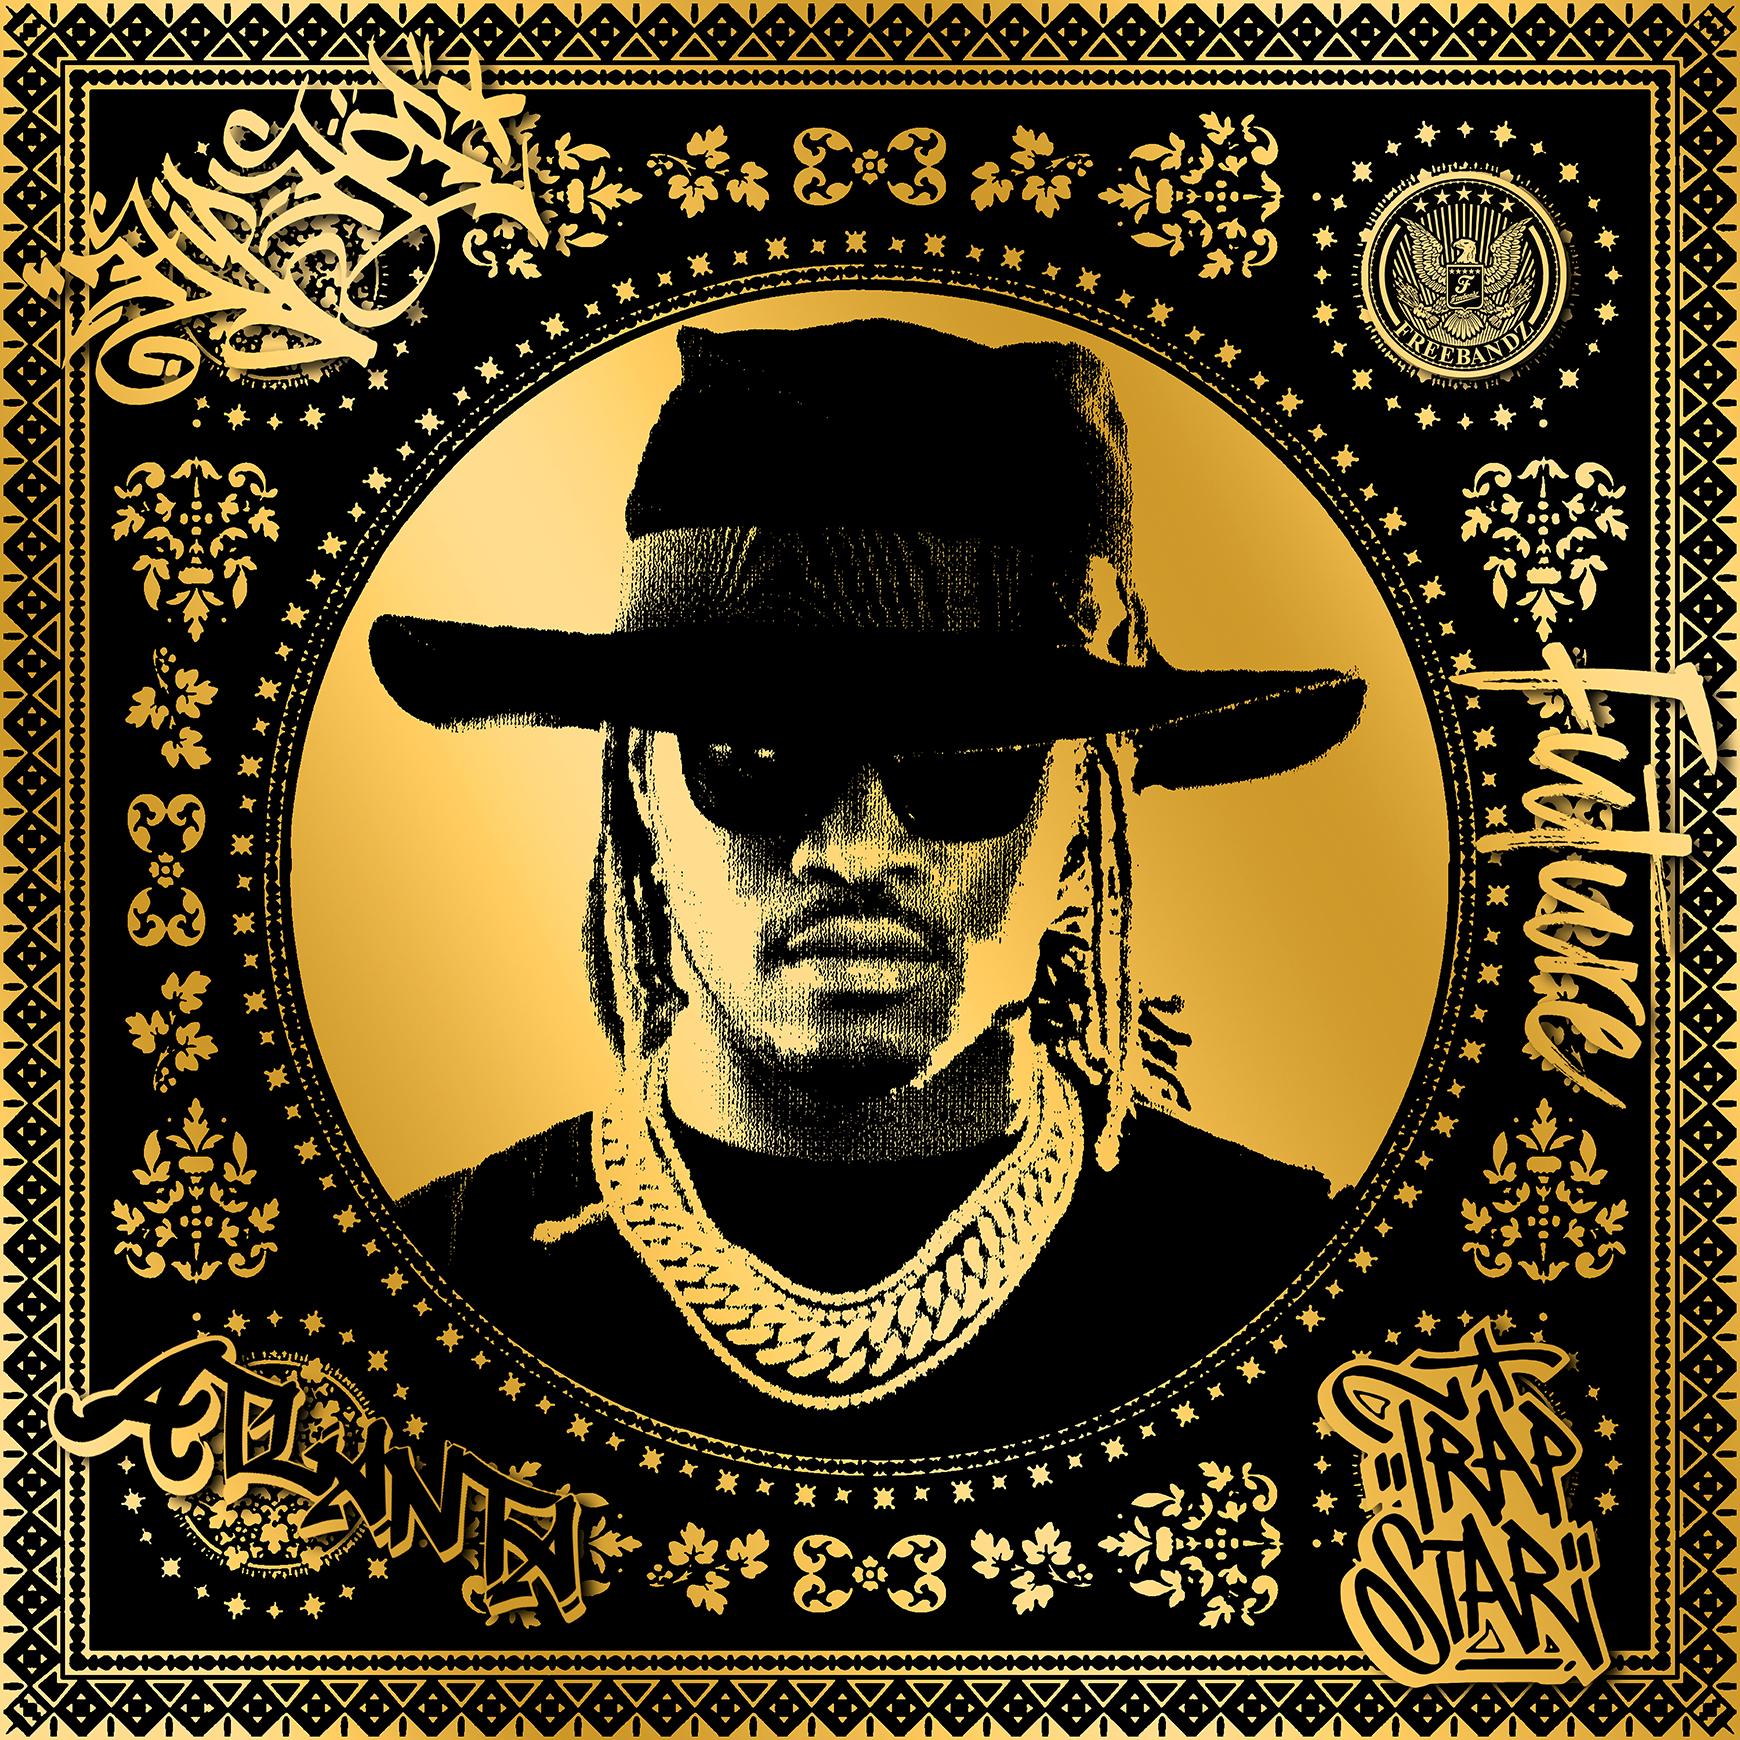 Future (Gold) (50 Years, Hip Hop, Rap, Iconic, Artist, Musician, Rapper) - Print by Agent X